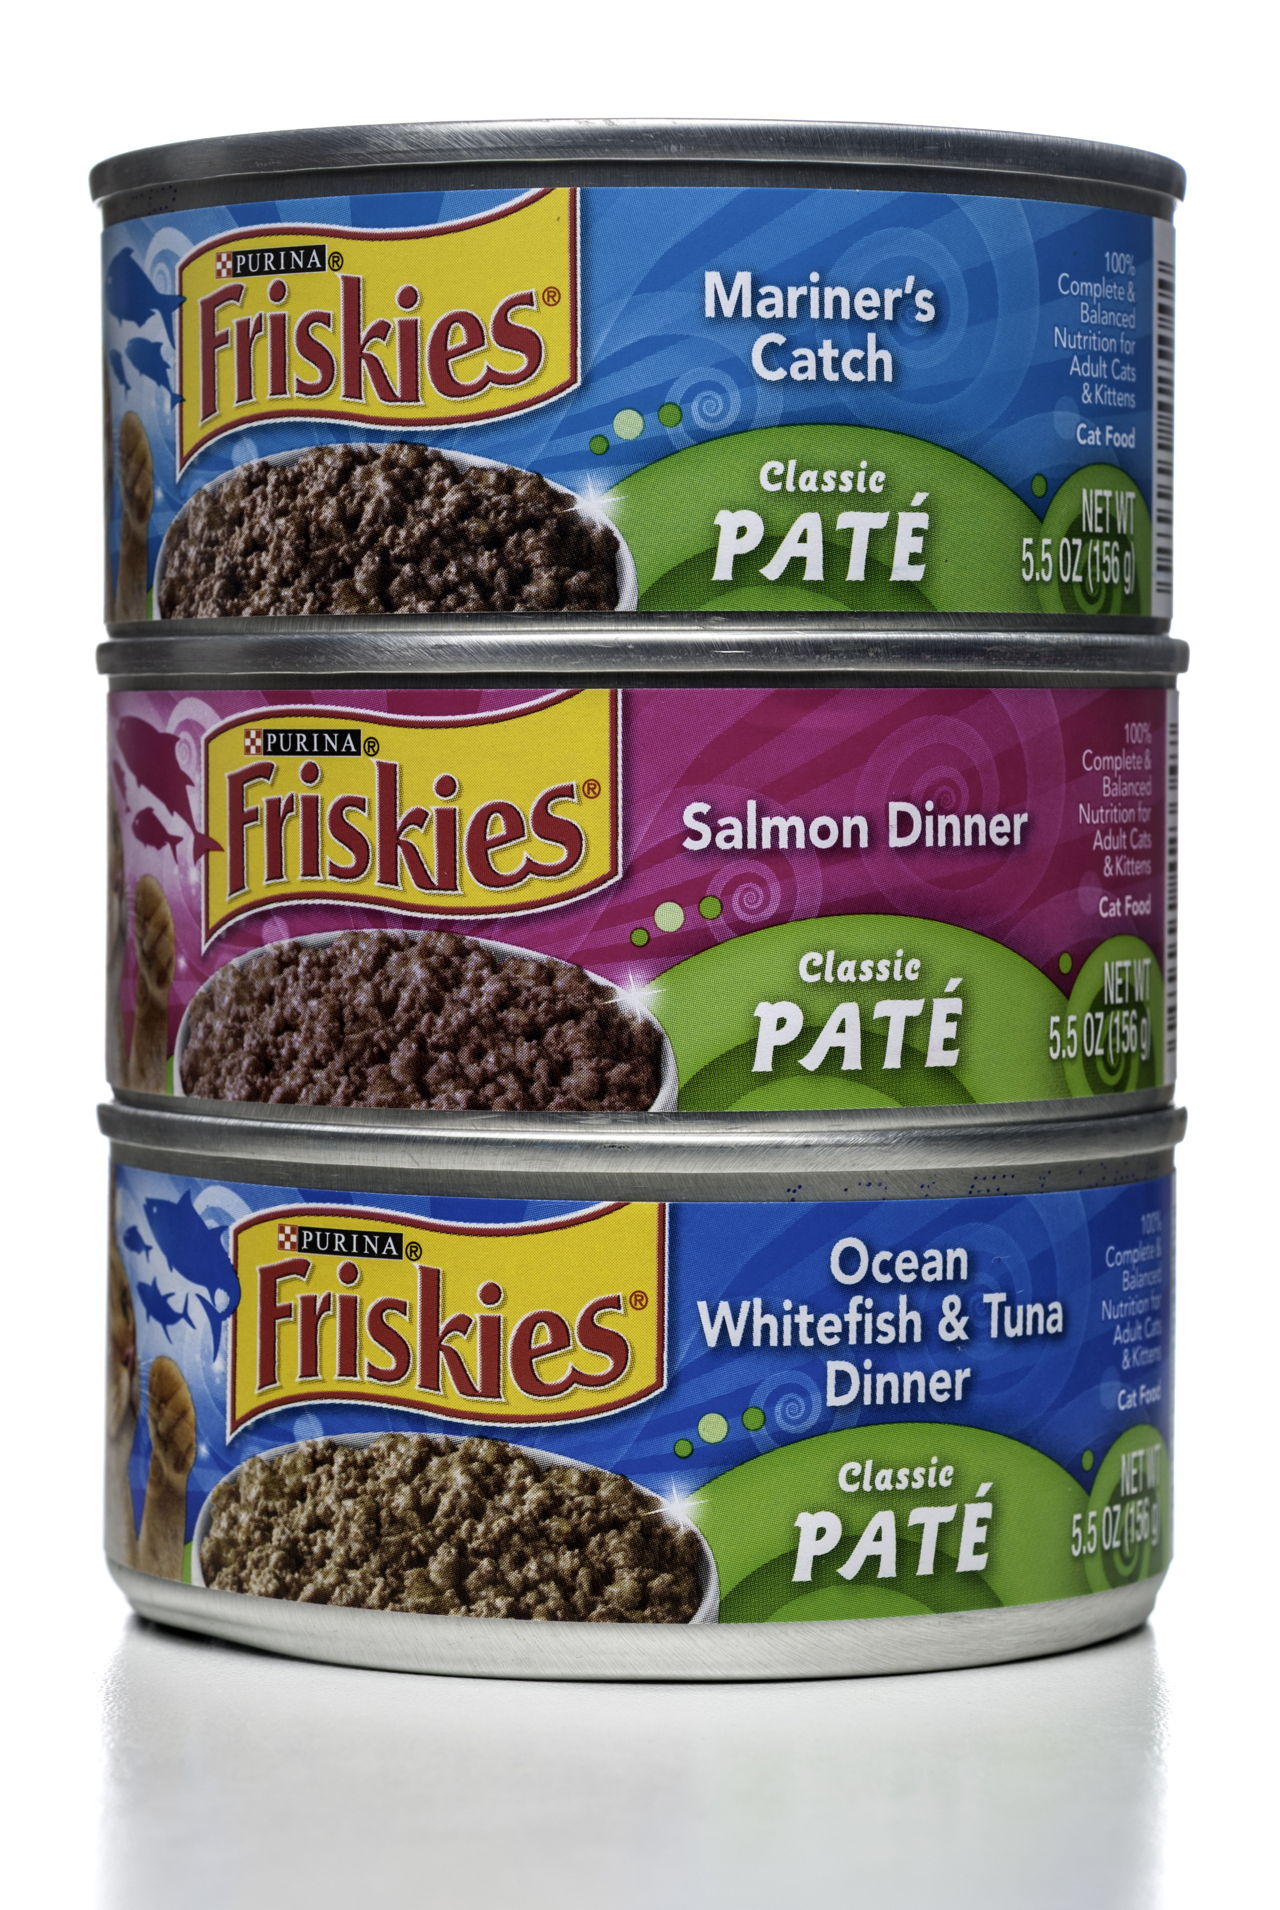 High Protein Cat Food